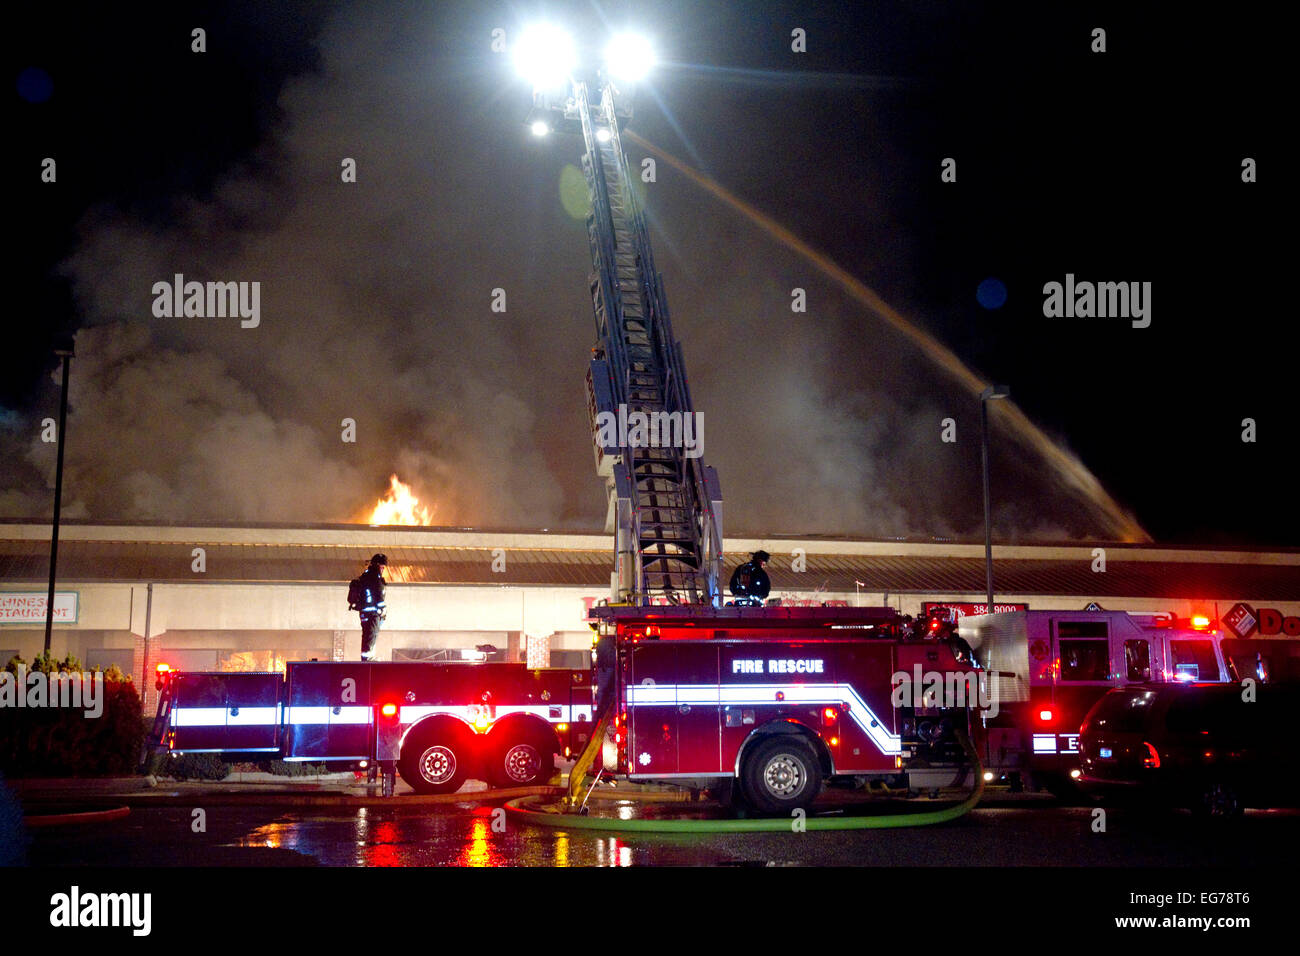 Firefighters respond to a four alarm fire in Boise, Idaho, USA. Stock Photo